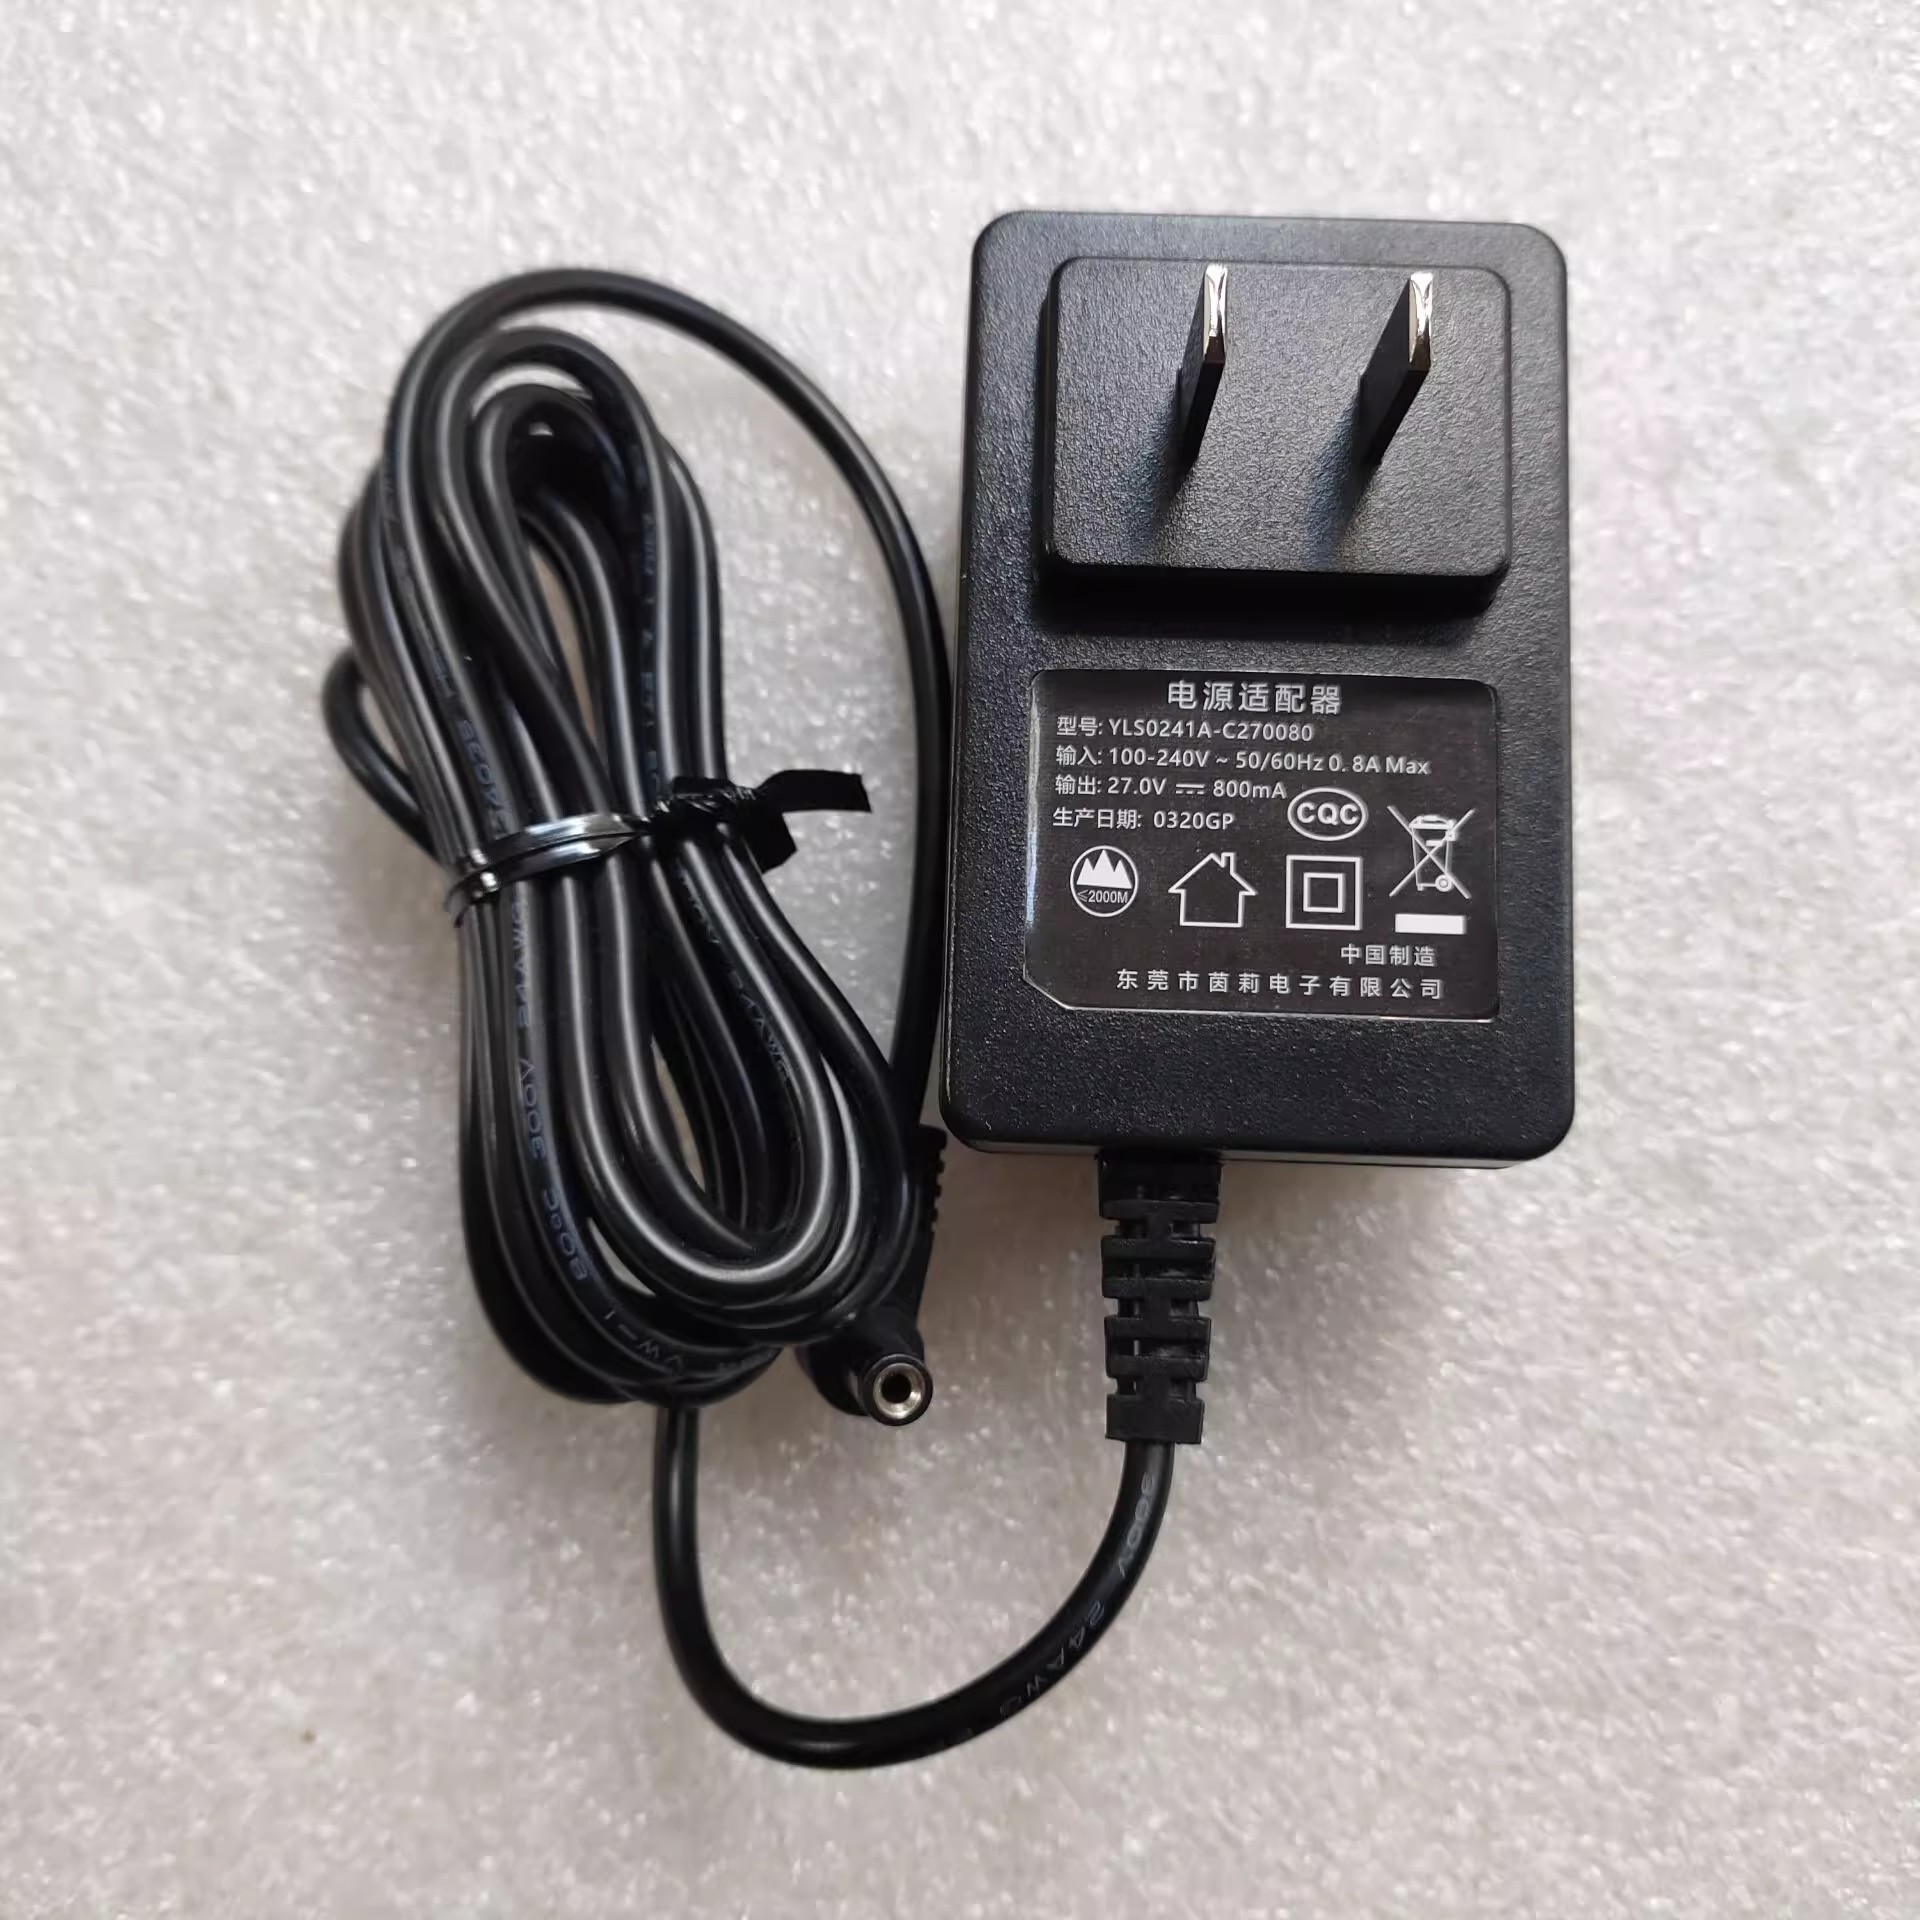 *Brand NEW*YLS0241A-C270080 27V 800MA AC DC ADAPTHE POWER Supply